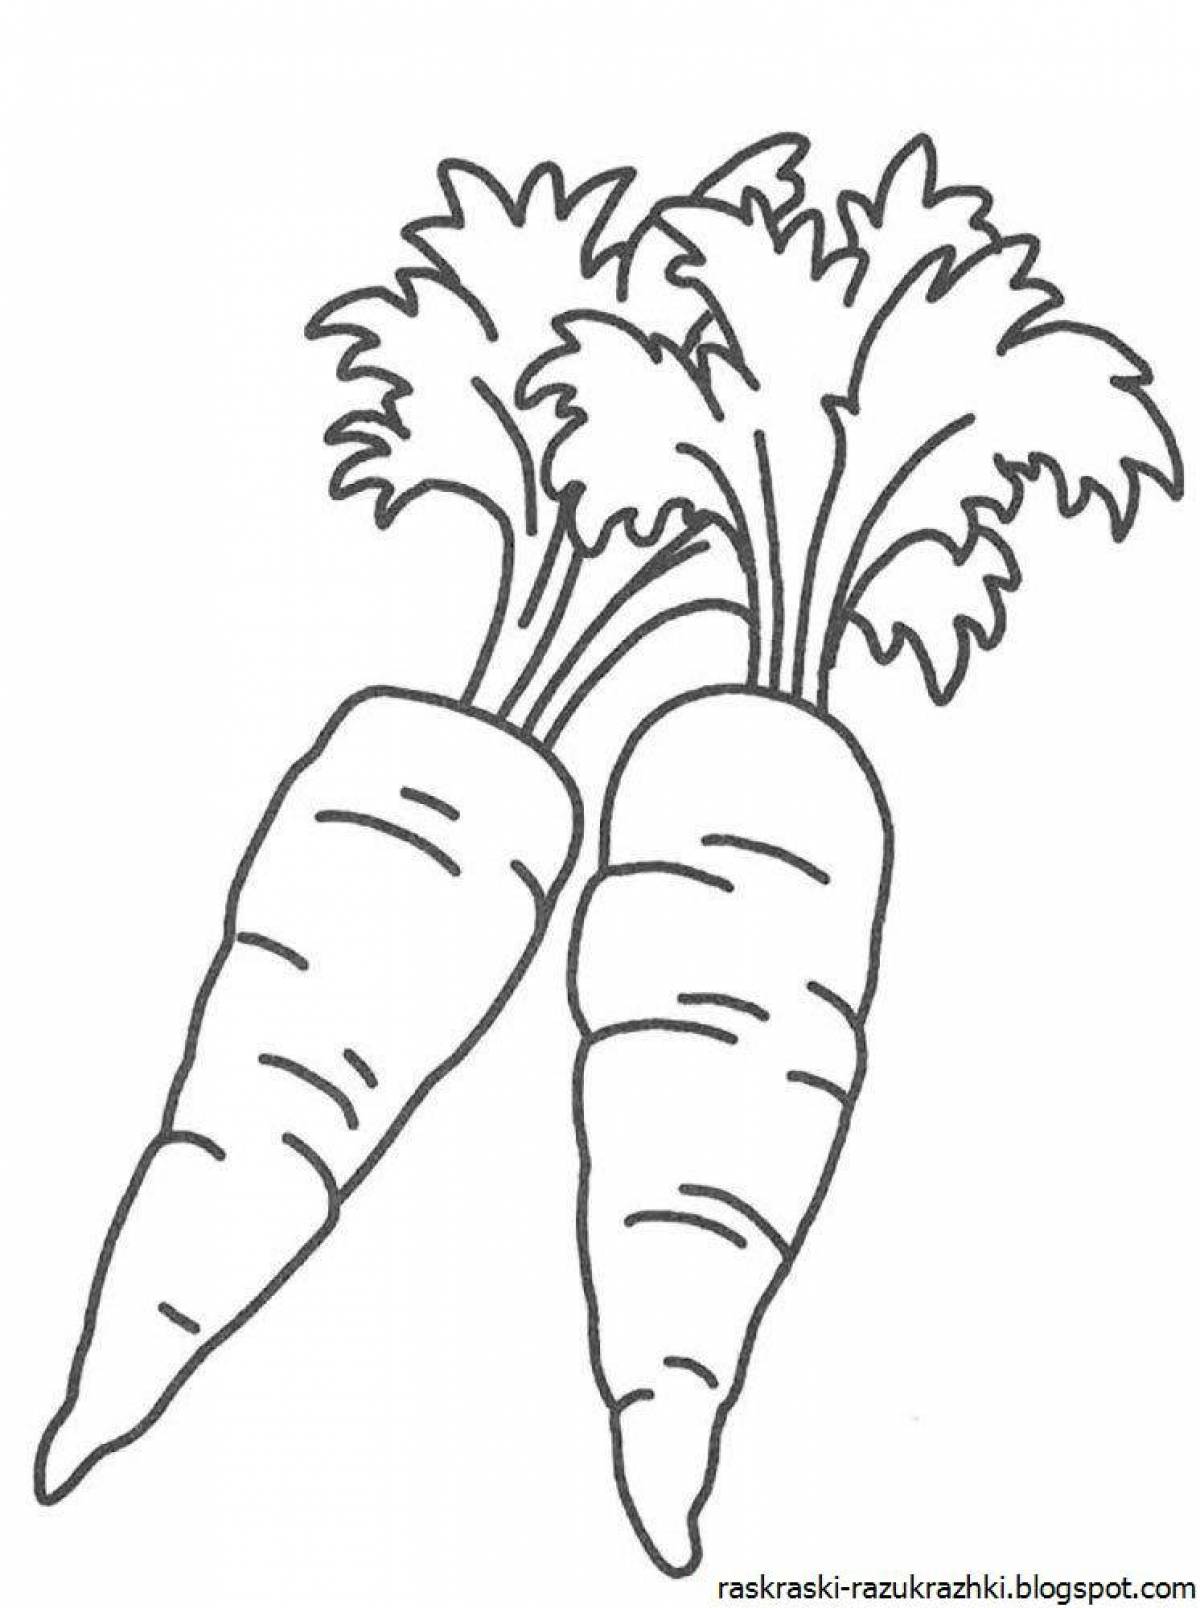 A fun carrot coloring book for kids